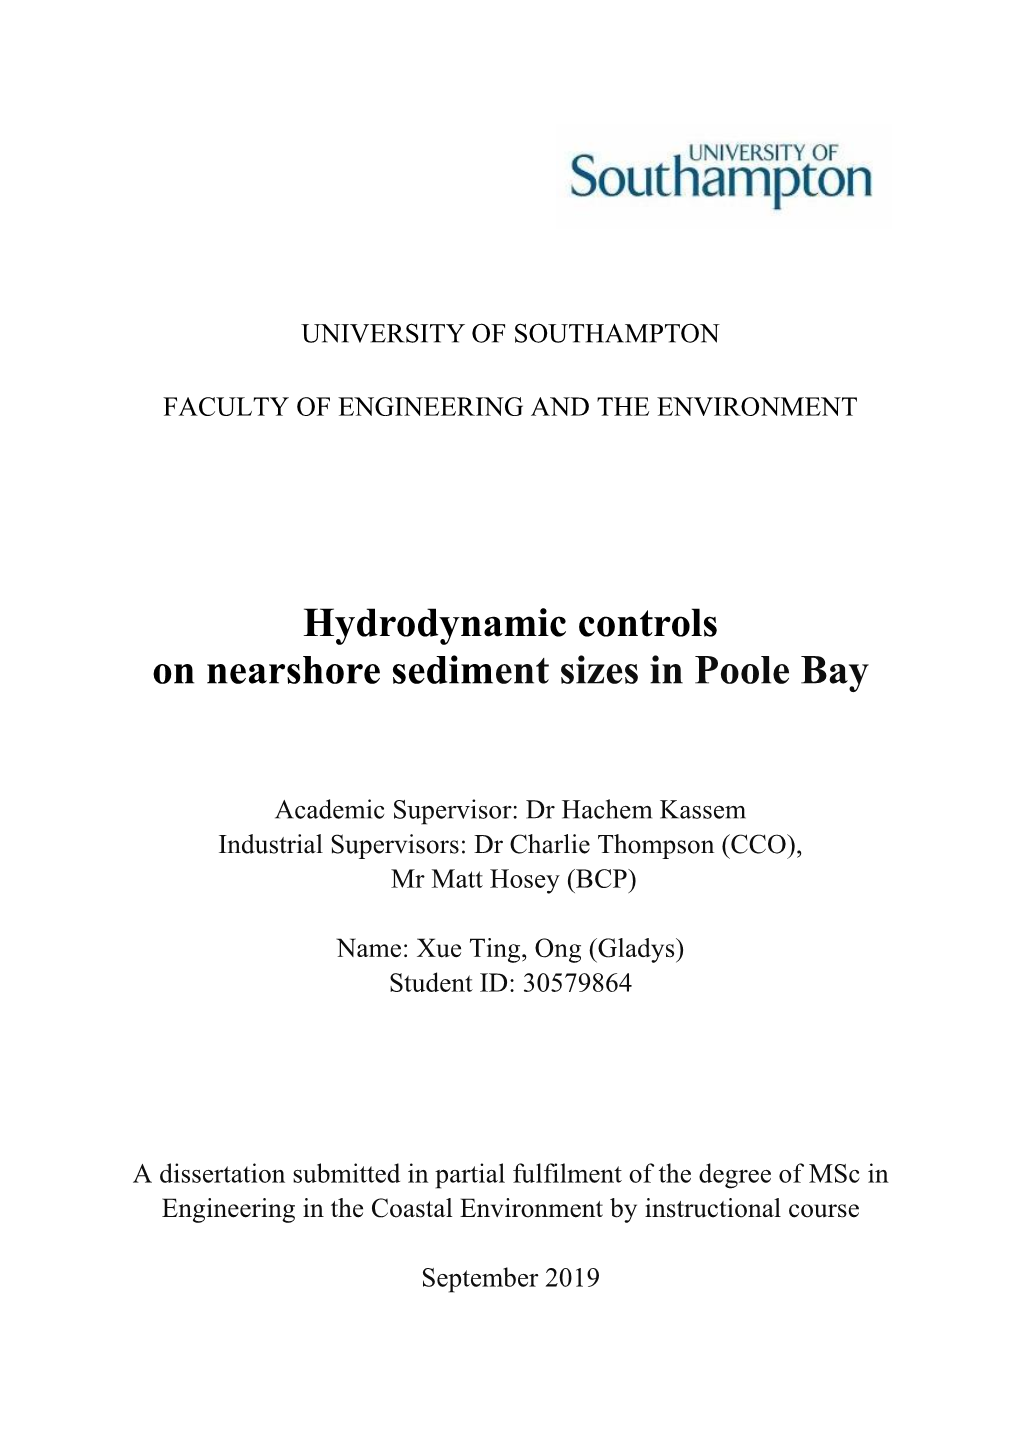 Hydrodynamic Controls on Nearshore Sediment Sizes in Poole Bay